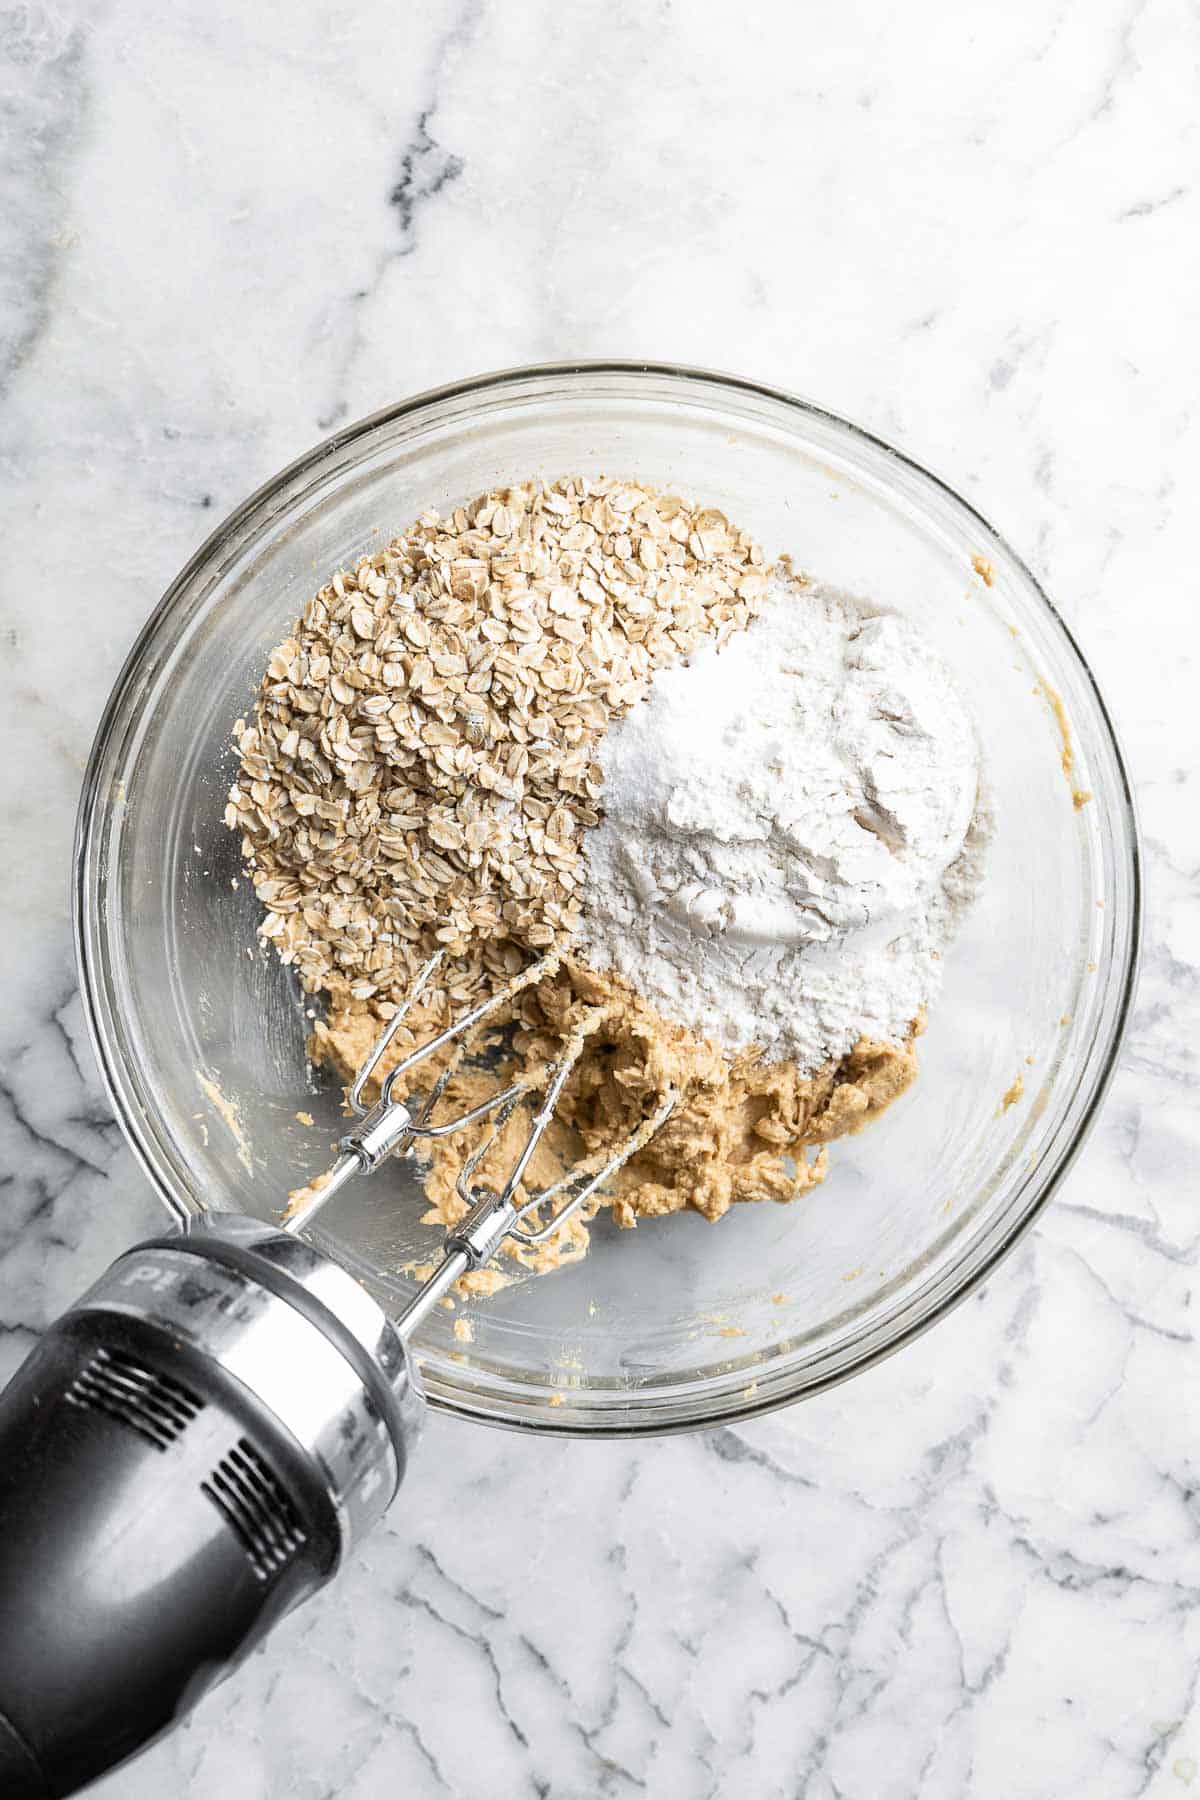 Soft and chewy Oatmeal Raisin Cookies are a quick and easy one bowl recipe made using simple pantry staple ingredients in under 20 minutes with no chilling! | aheadofthyme.com